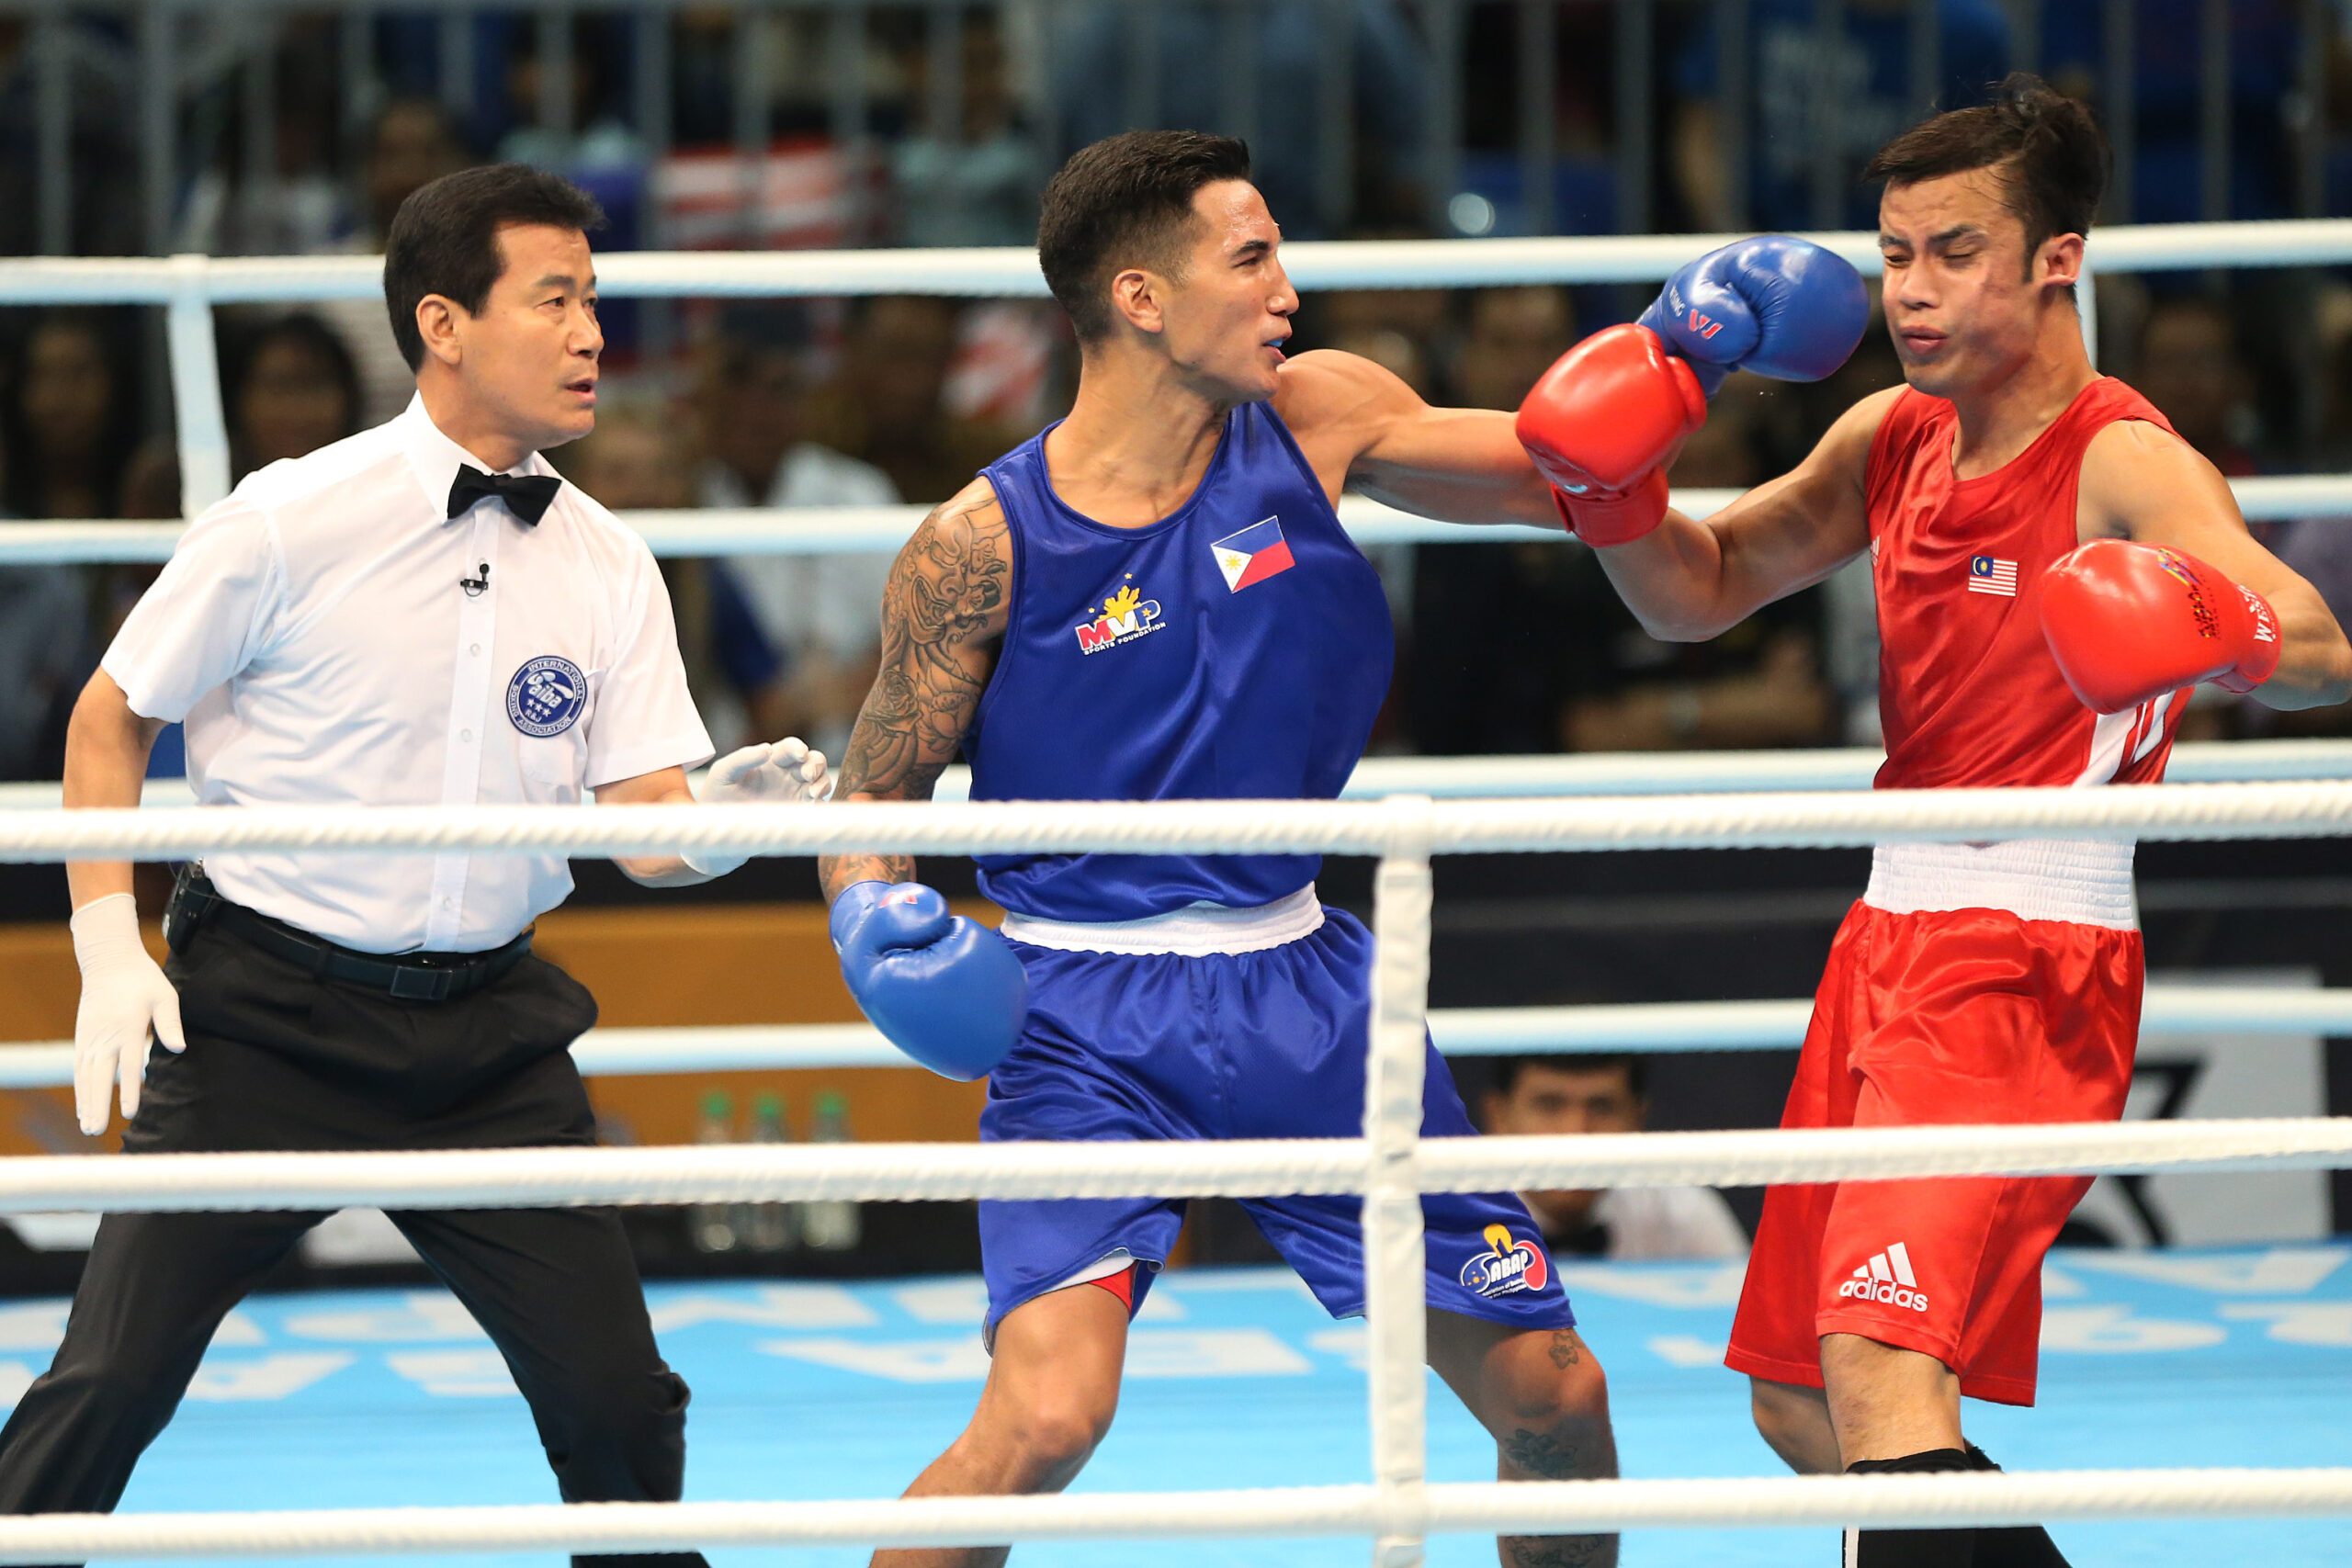 John Marvin destroys Malaysian foe in 21 seconds to win light heavyweight gold